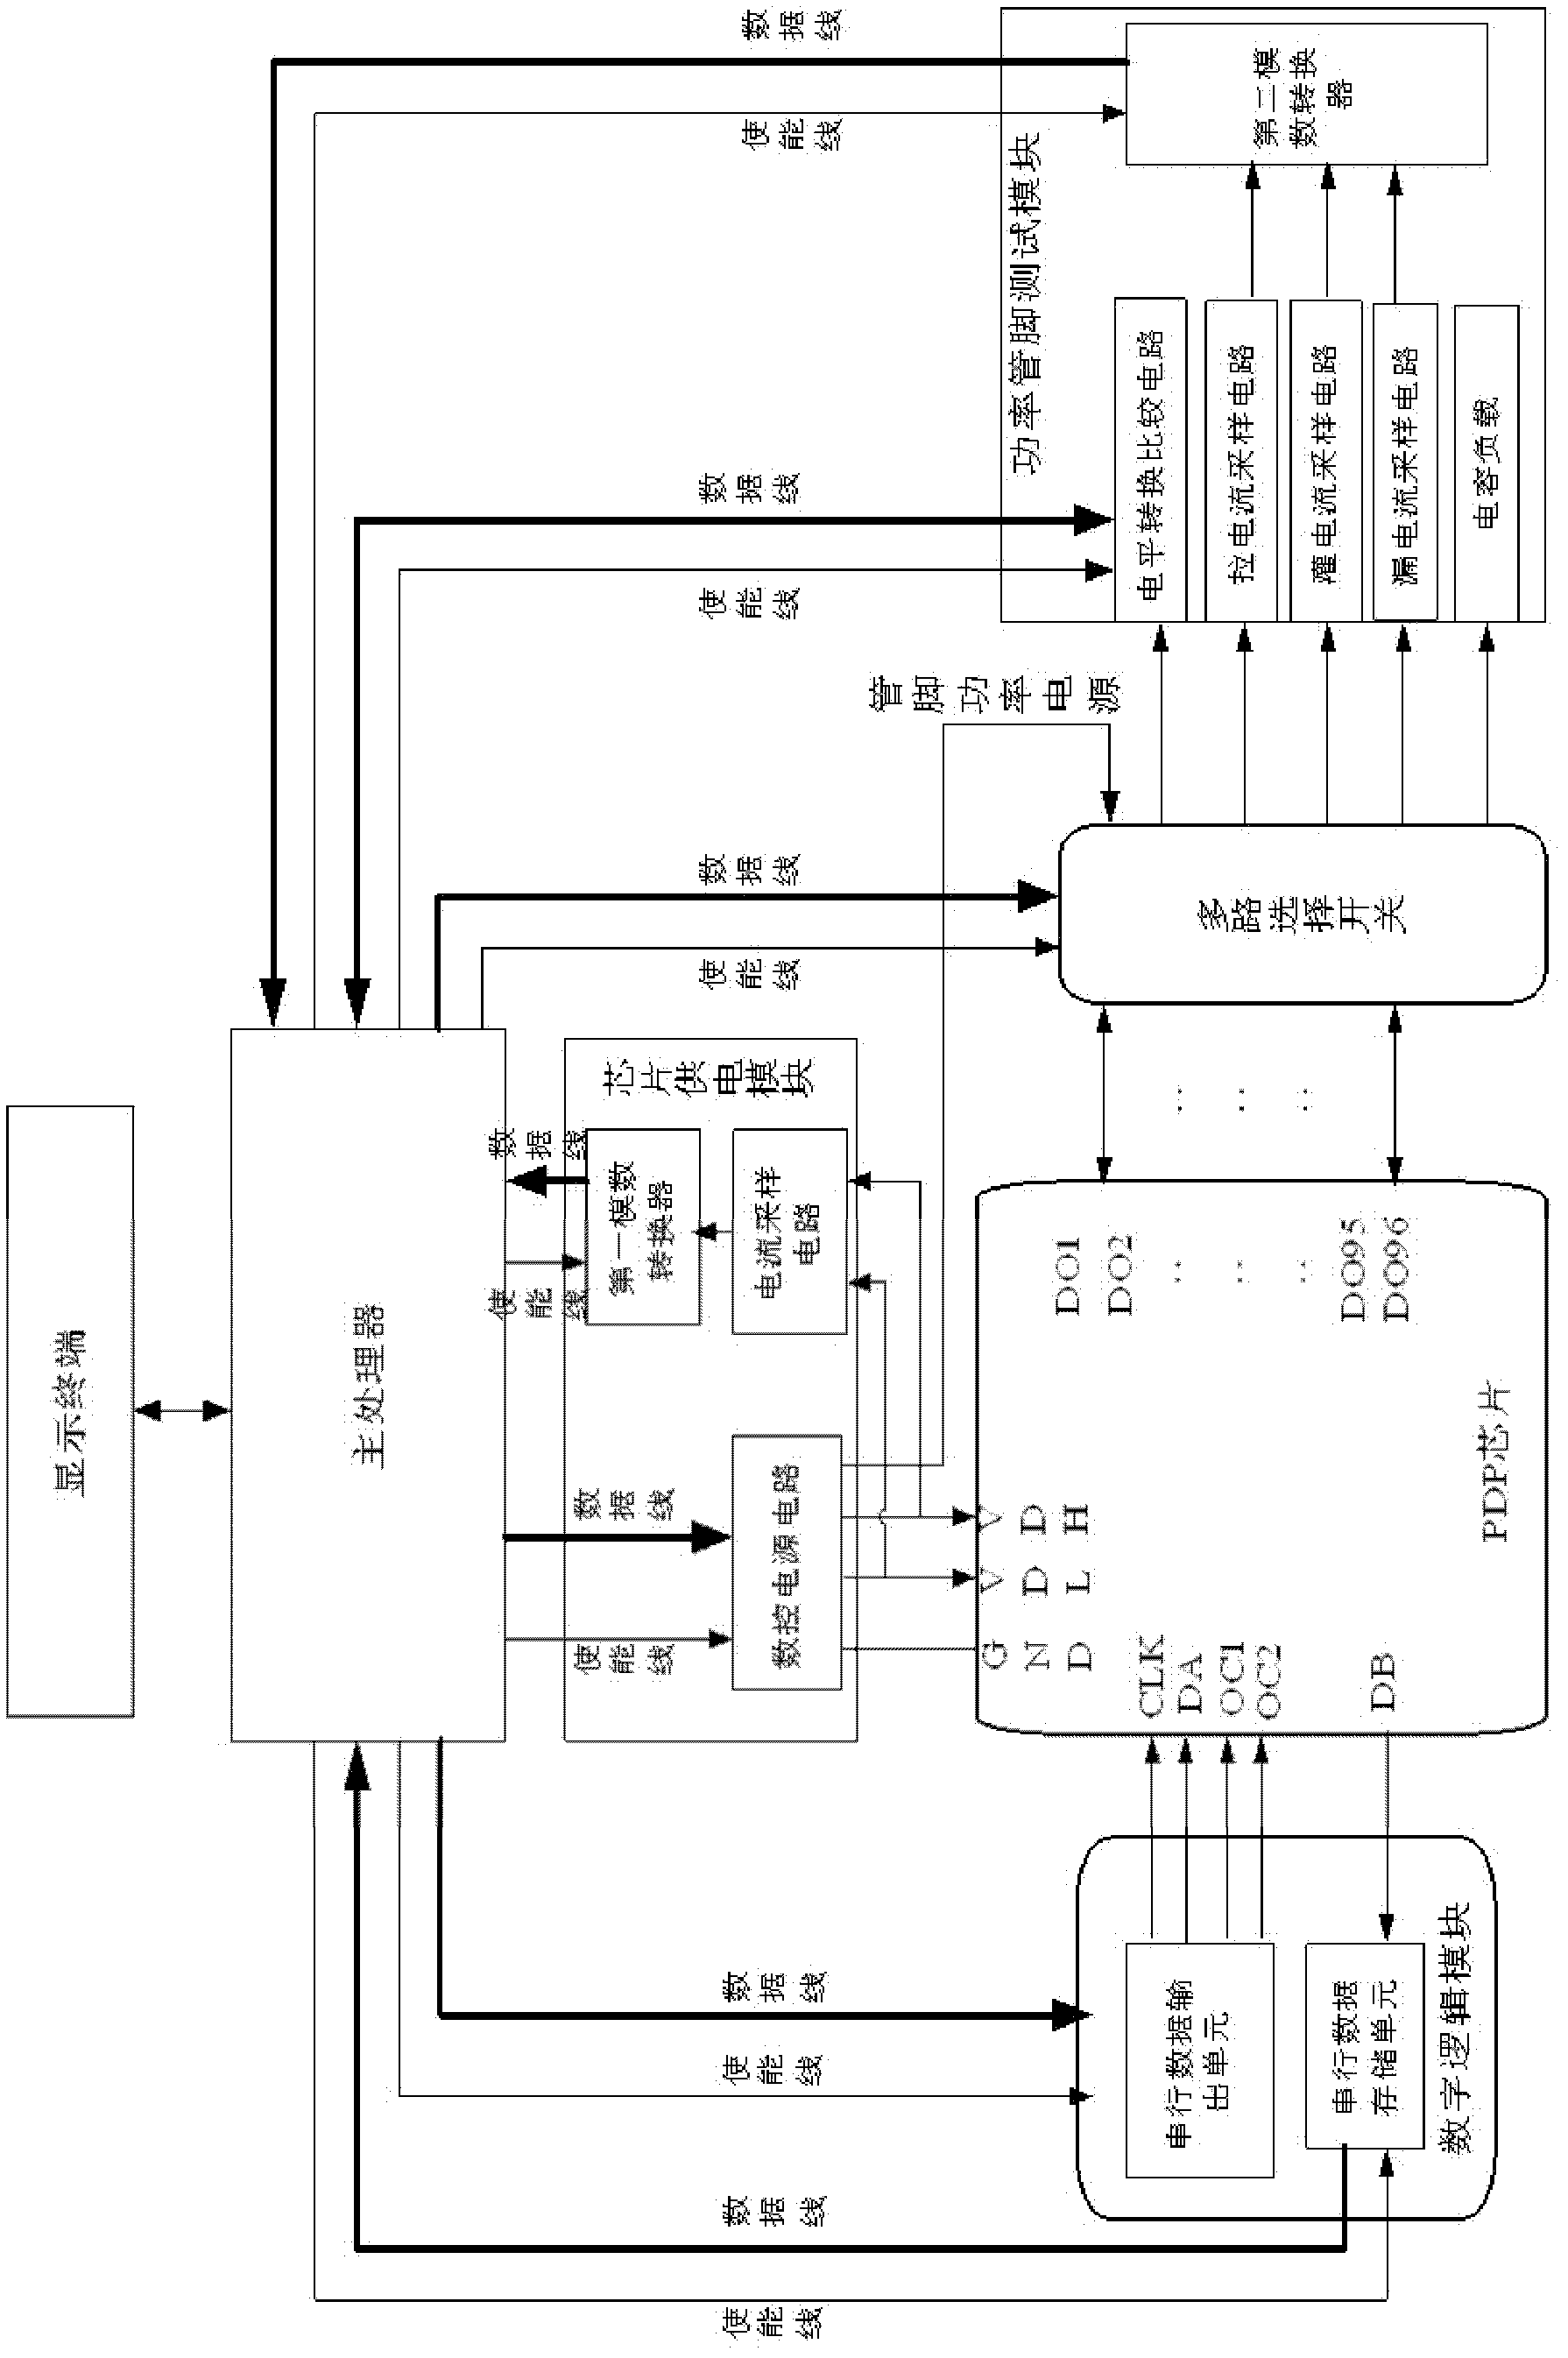 Device for testing plasma scanning driver ic